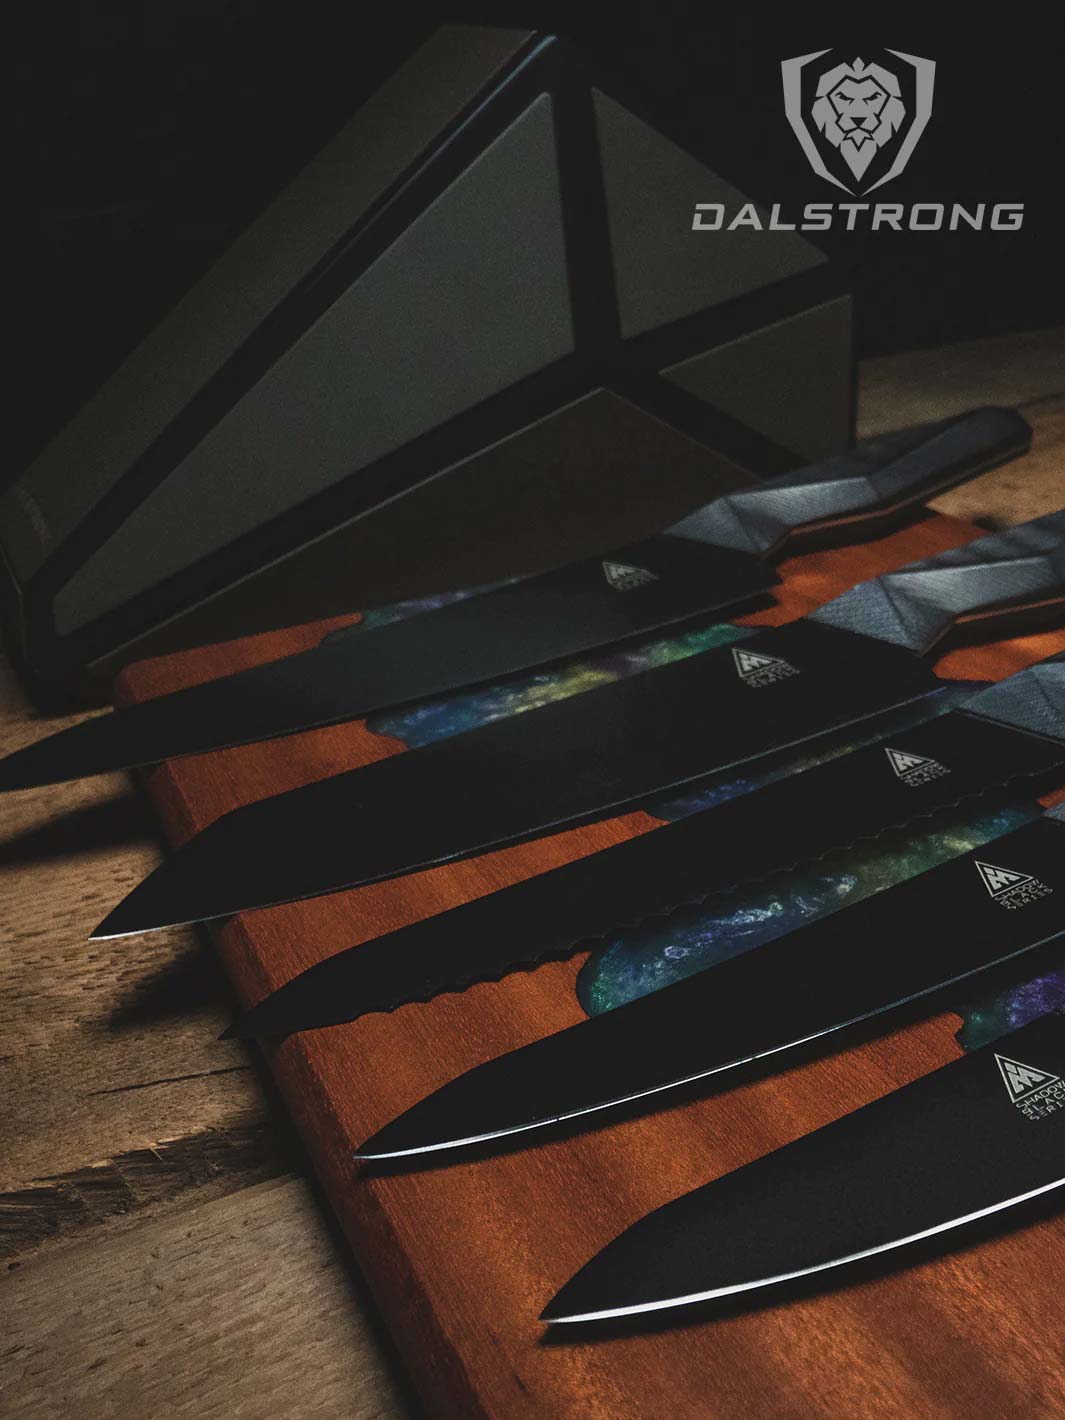 Kitchen Knife Block Sets from Dalstrong. Culinary made cool.